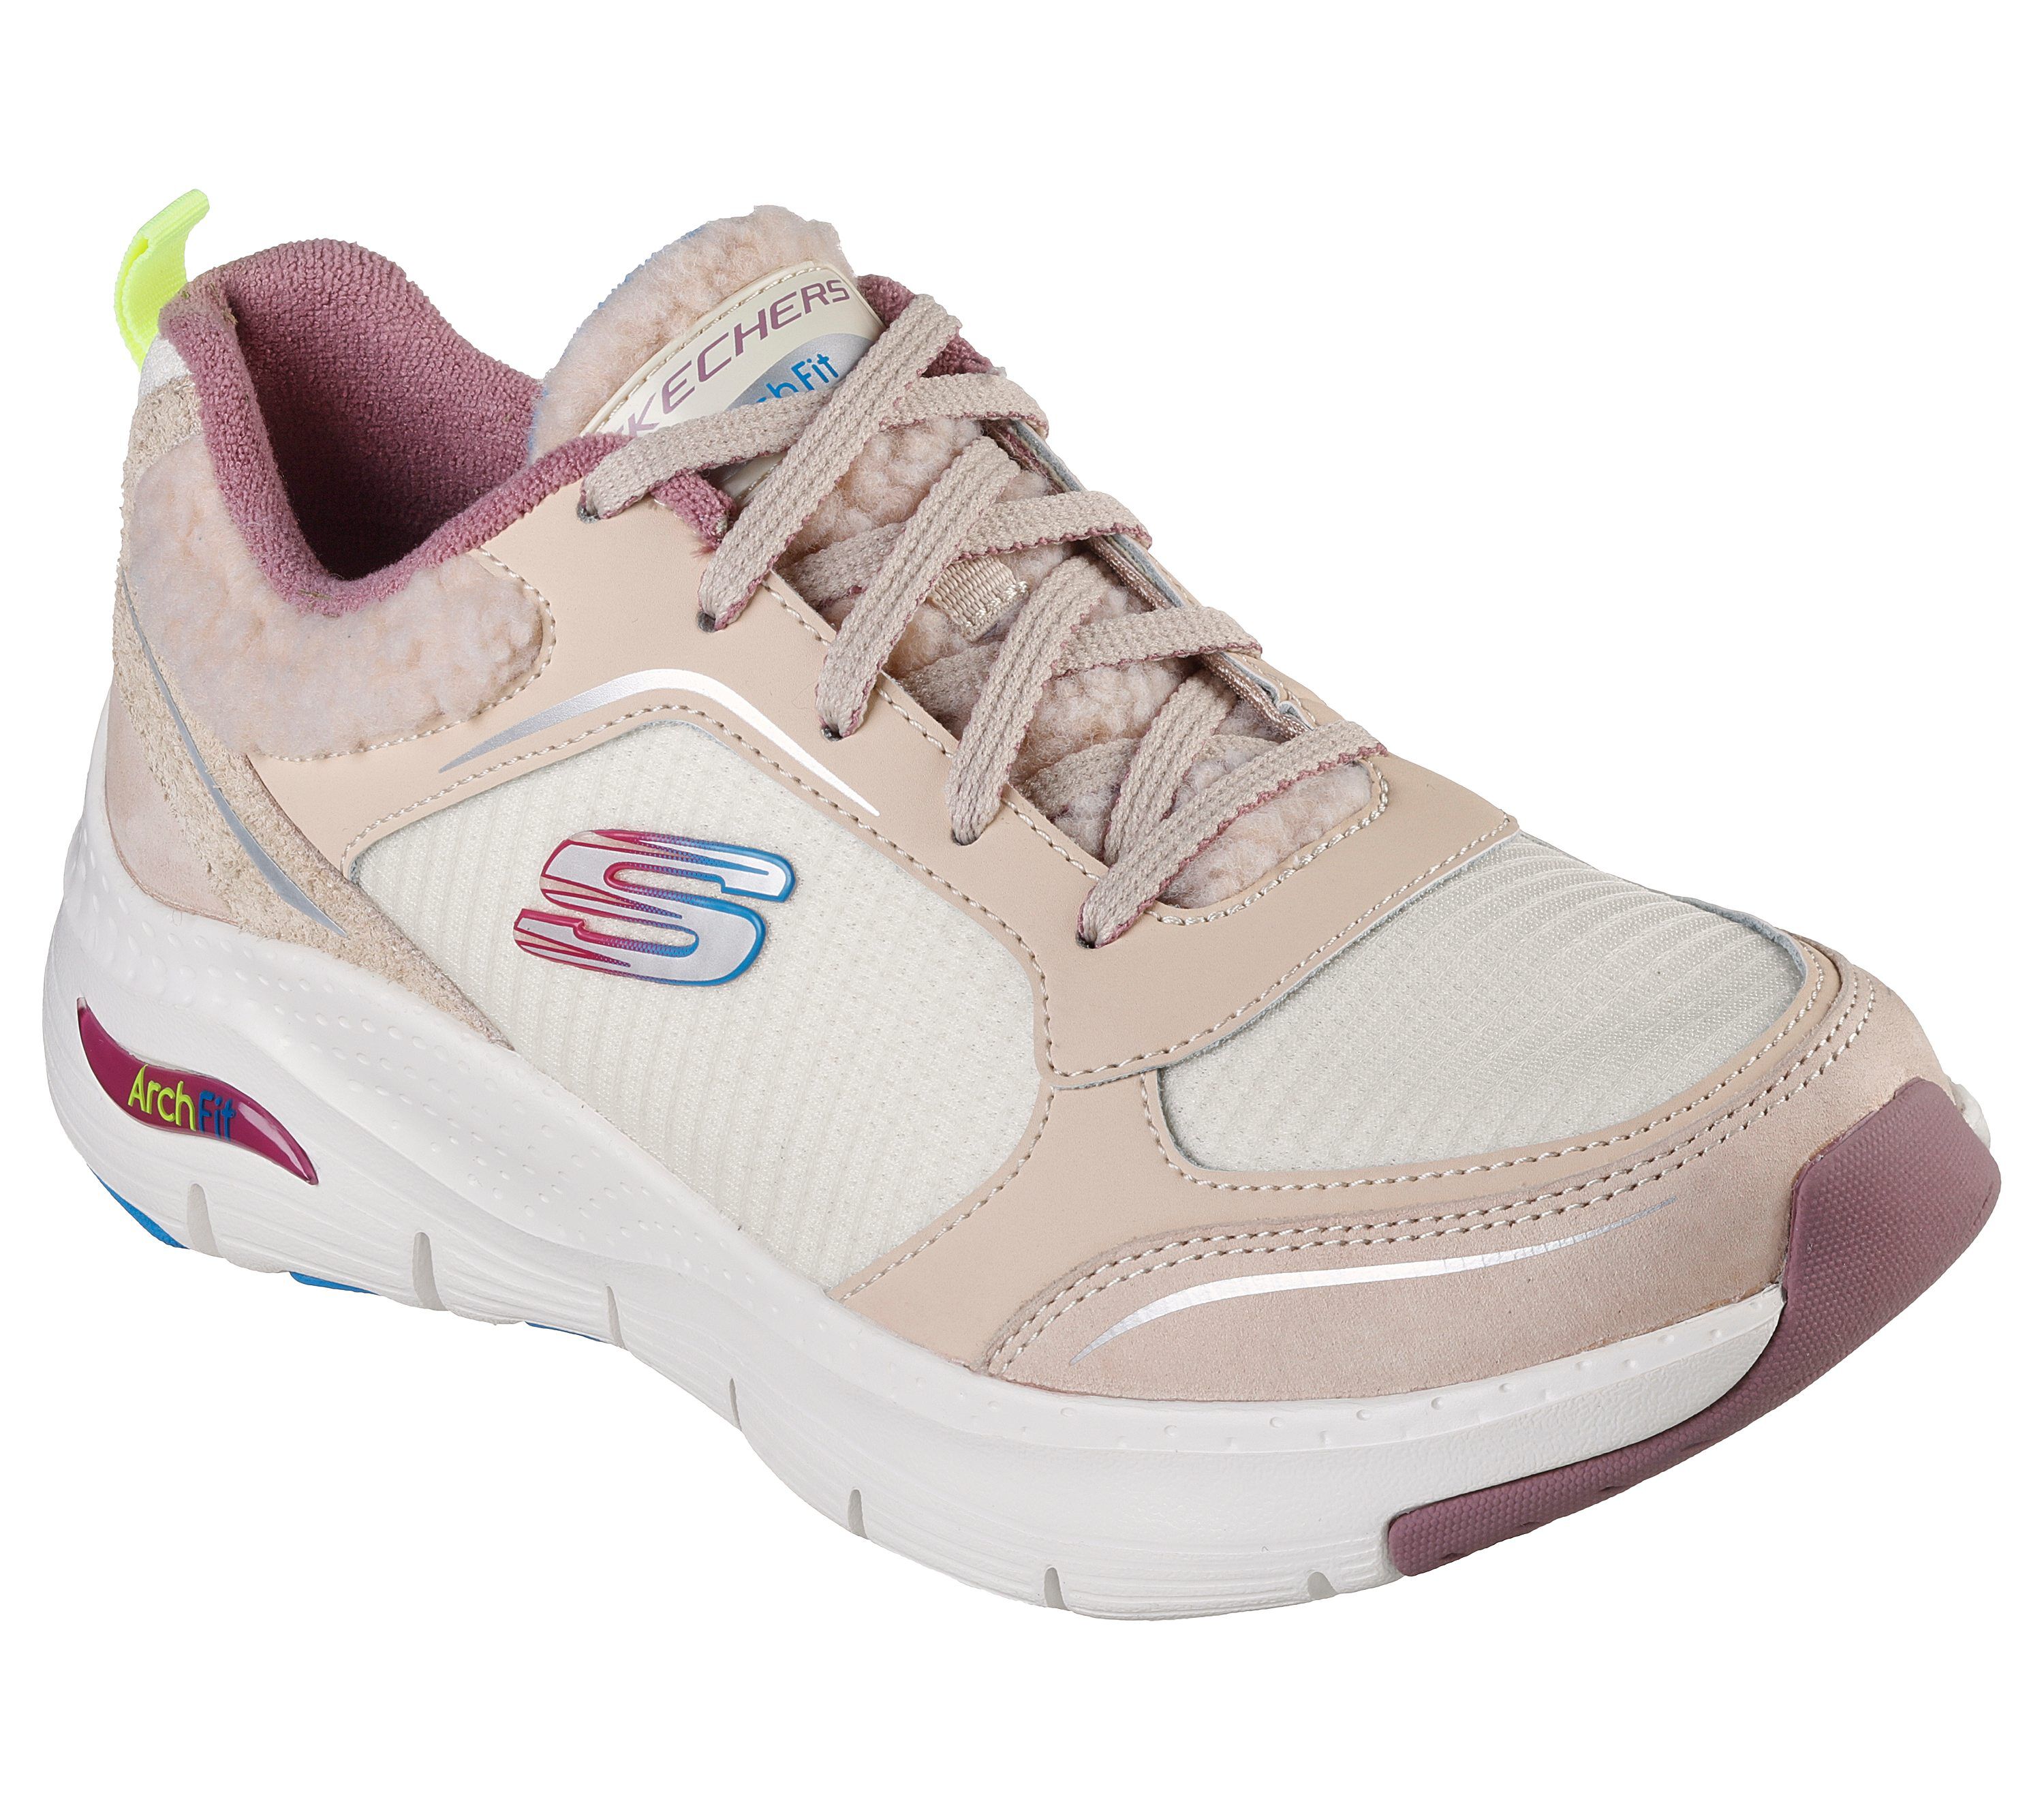 skechers shoes for women new arrival